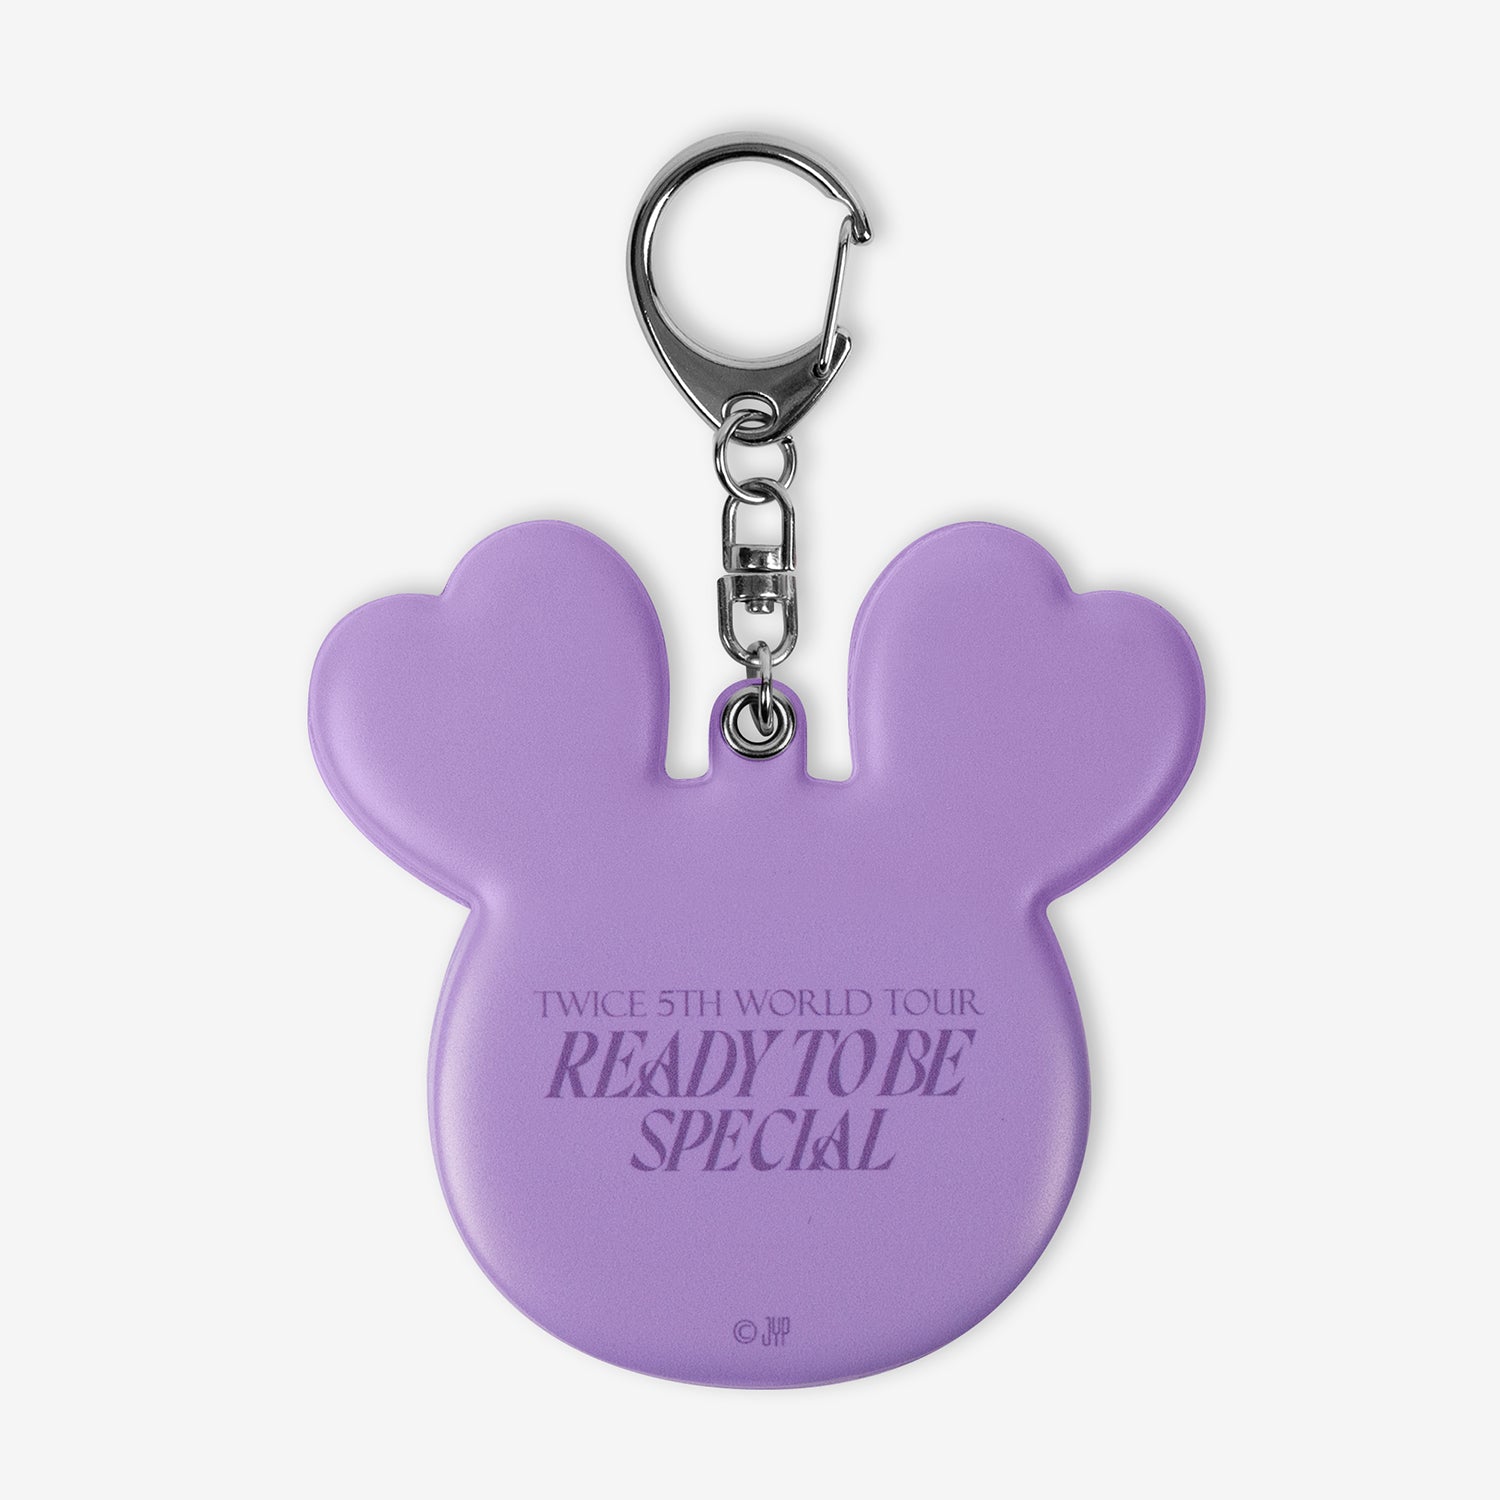 TWICE LOVELYS SLIDE MIRROR - SAVELY / TWICE『READY TO BE SPECIAL』